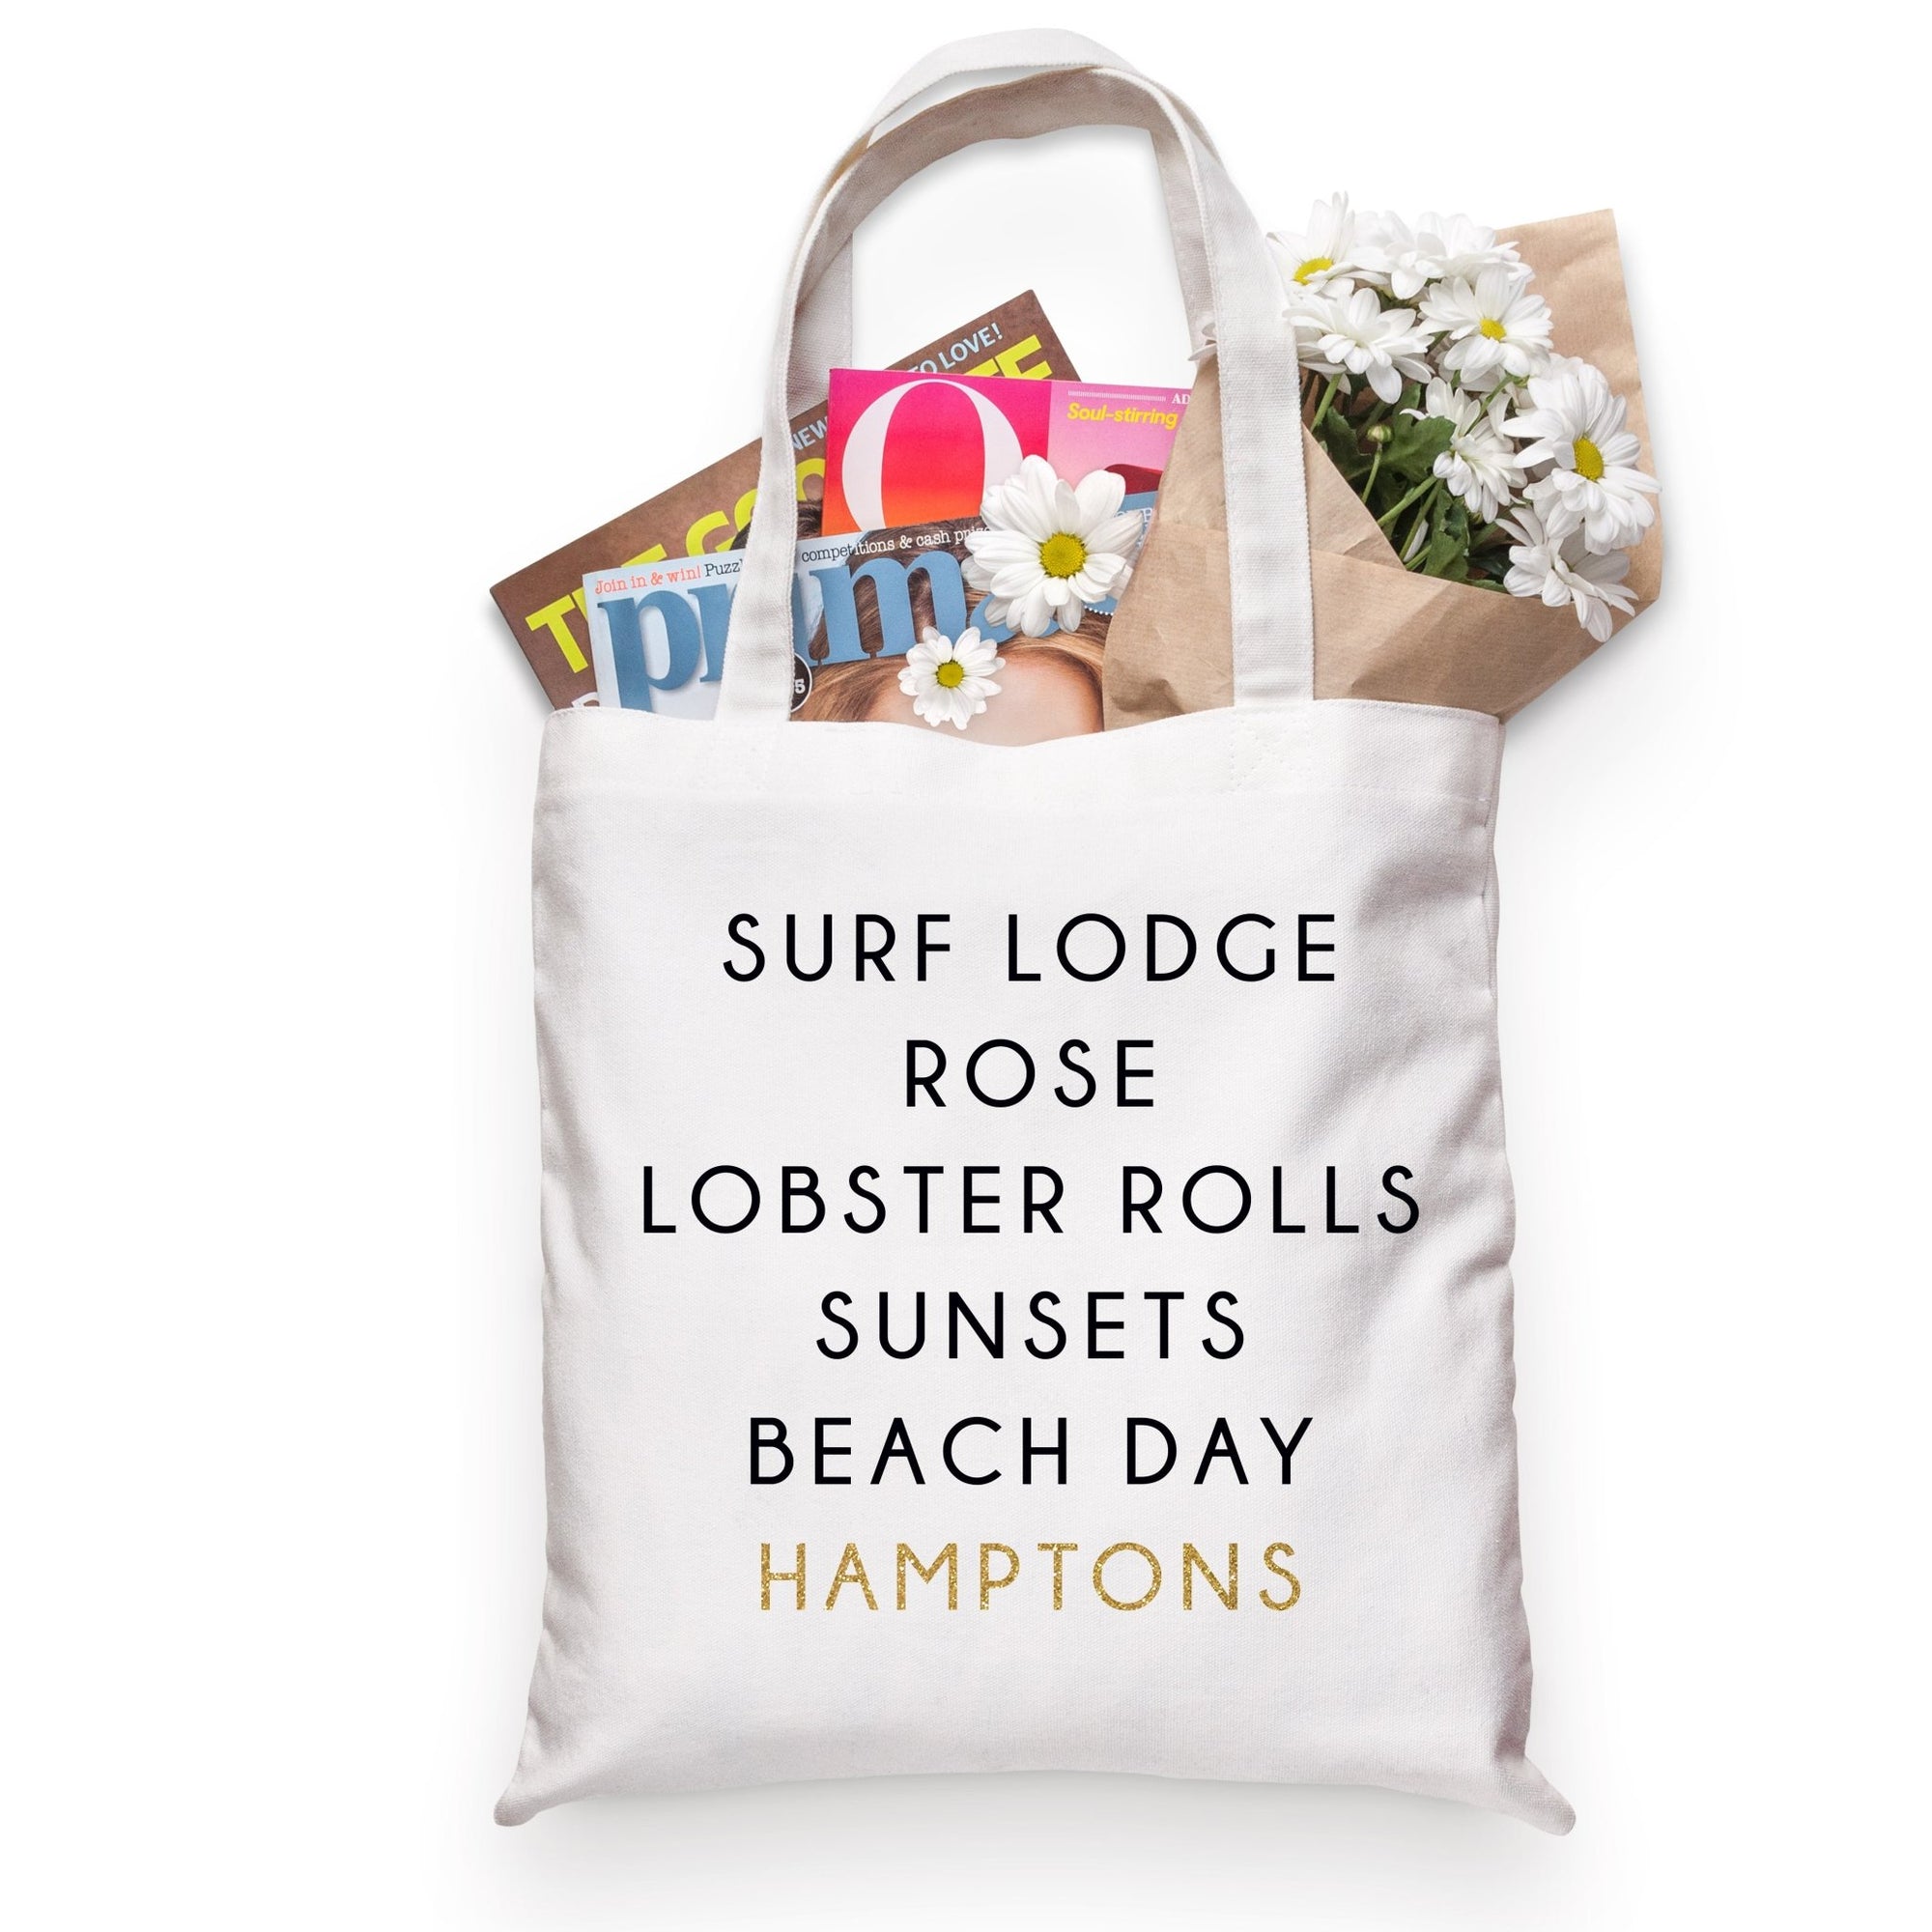 A cotton tote filled with flowers and a magazine is customized to be the perfect tote to take to the Hamptons